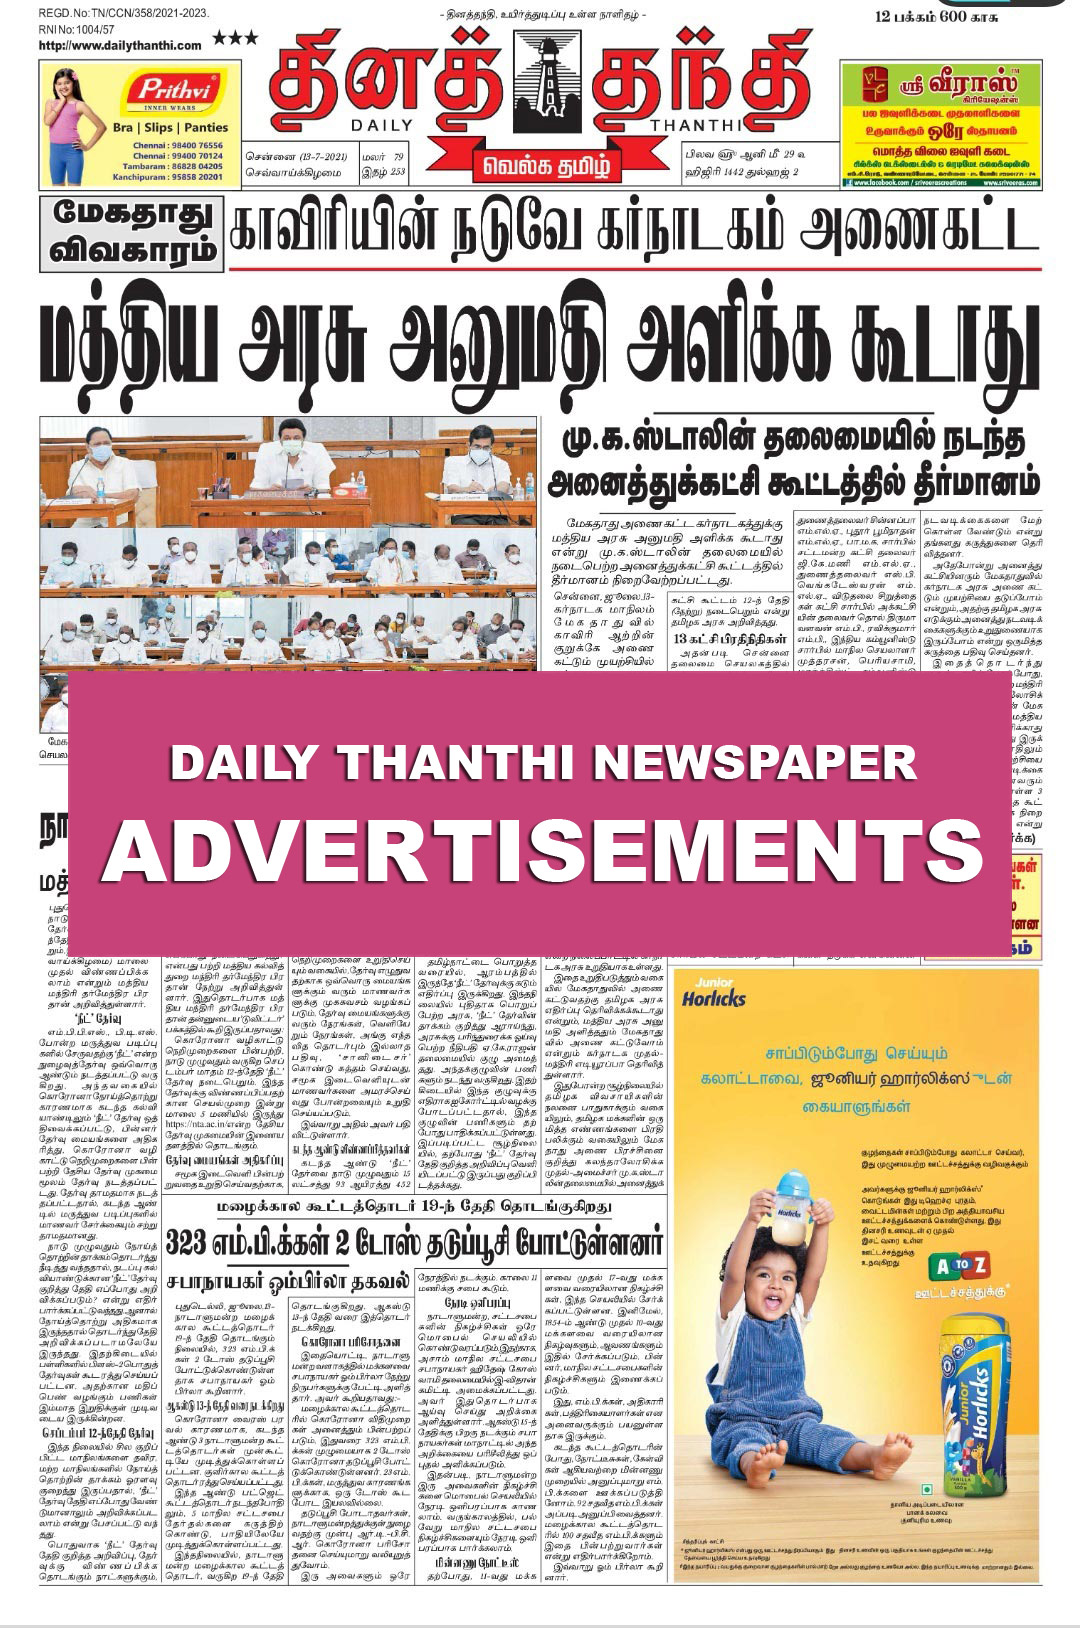 Daily Thanthi Newspaper Ad Online Booking @ Ads2publish